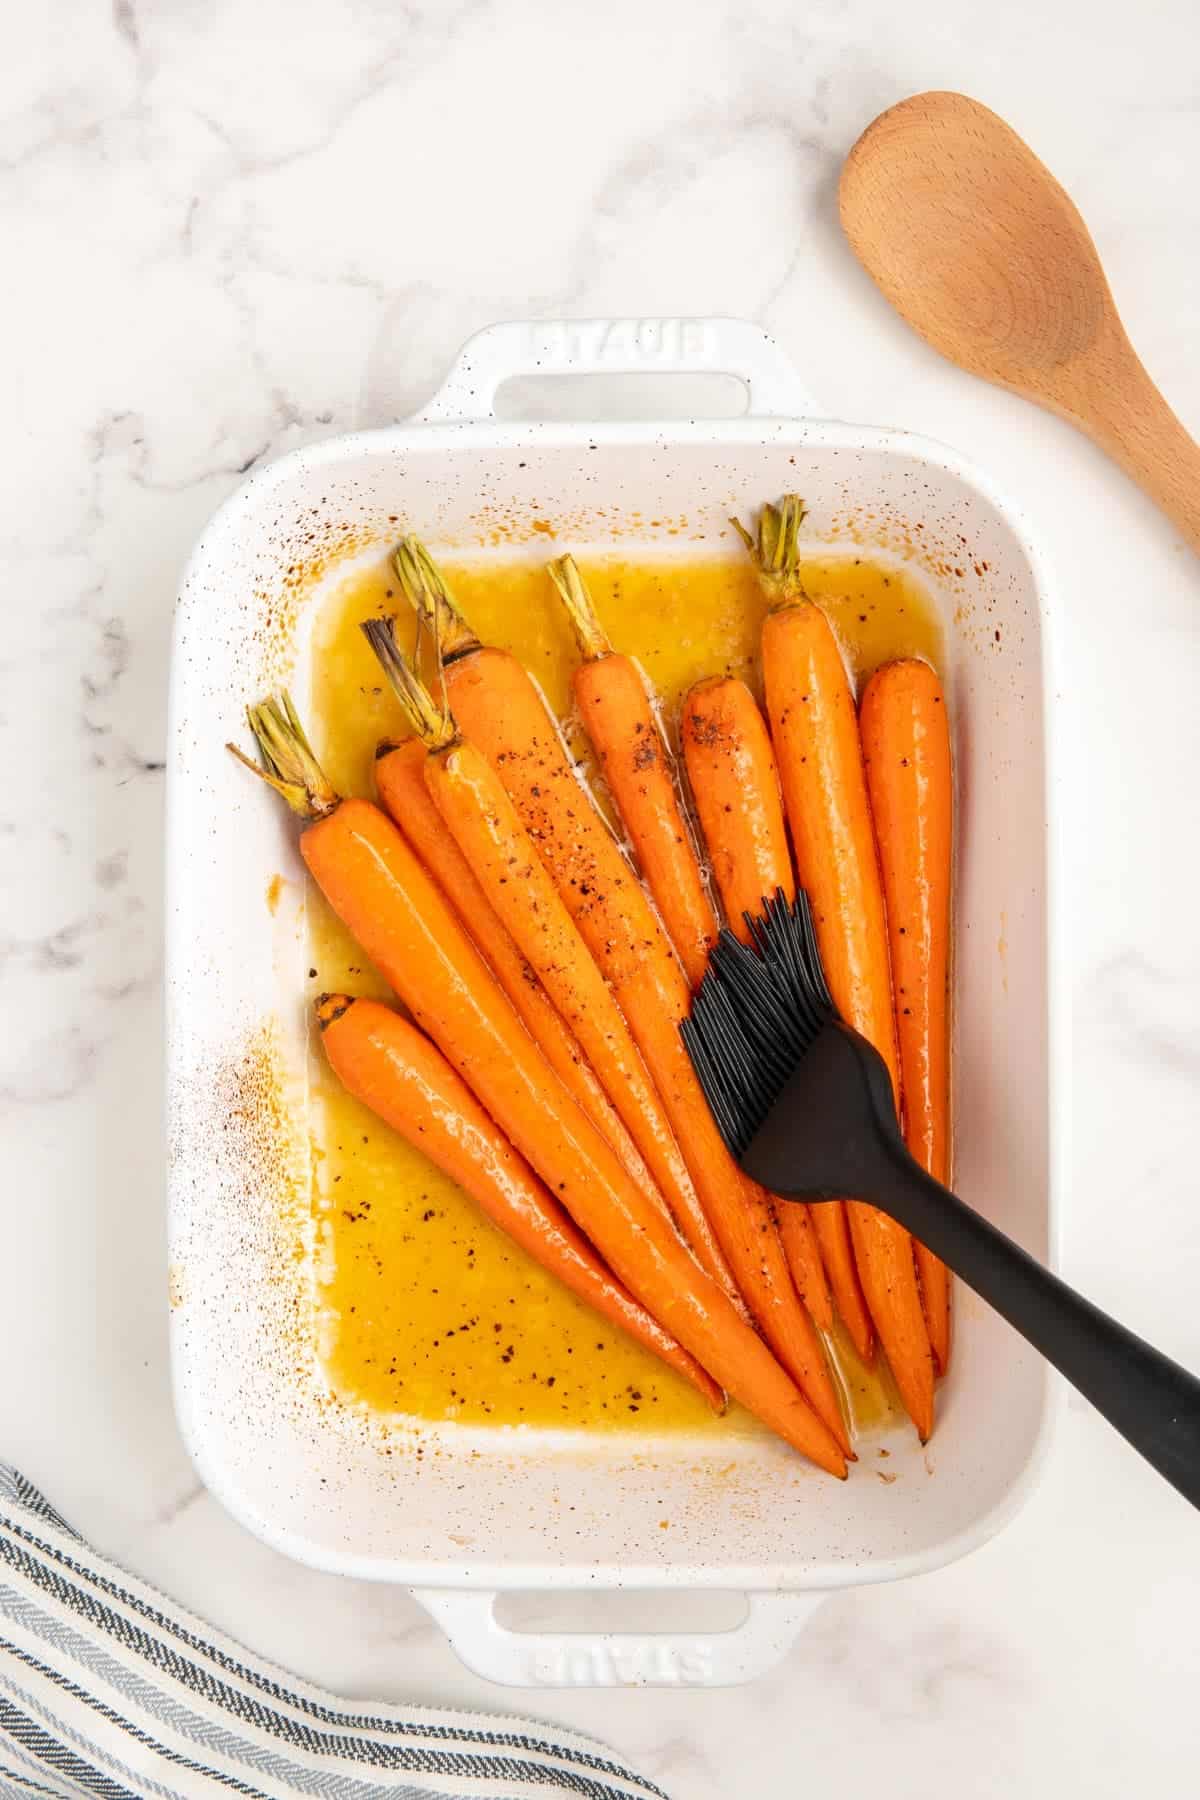 Partially cooked carrots in a brown sugar and honey glaze.